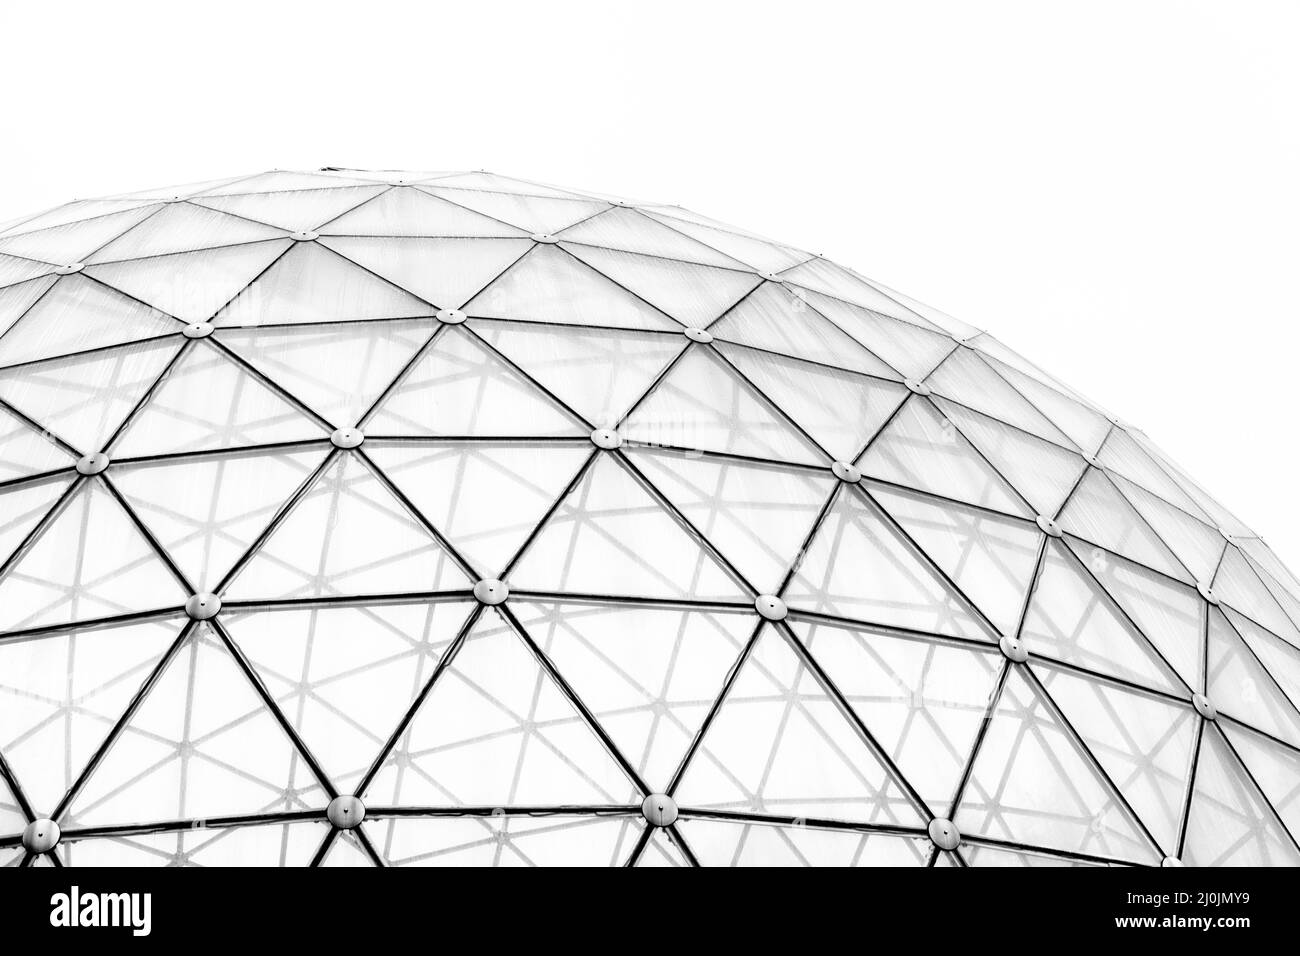 Abstract view of the glass dome of the Pyramid of Merkine in Lithuania Stock Photo